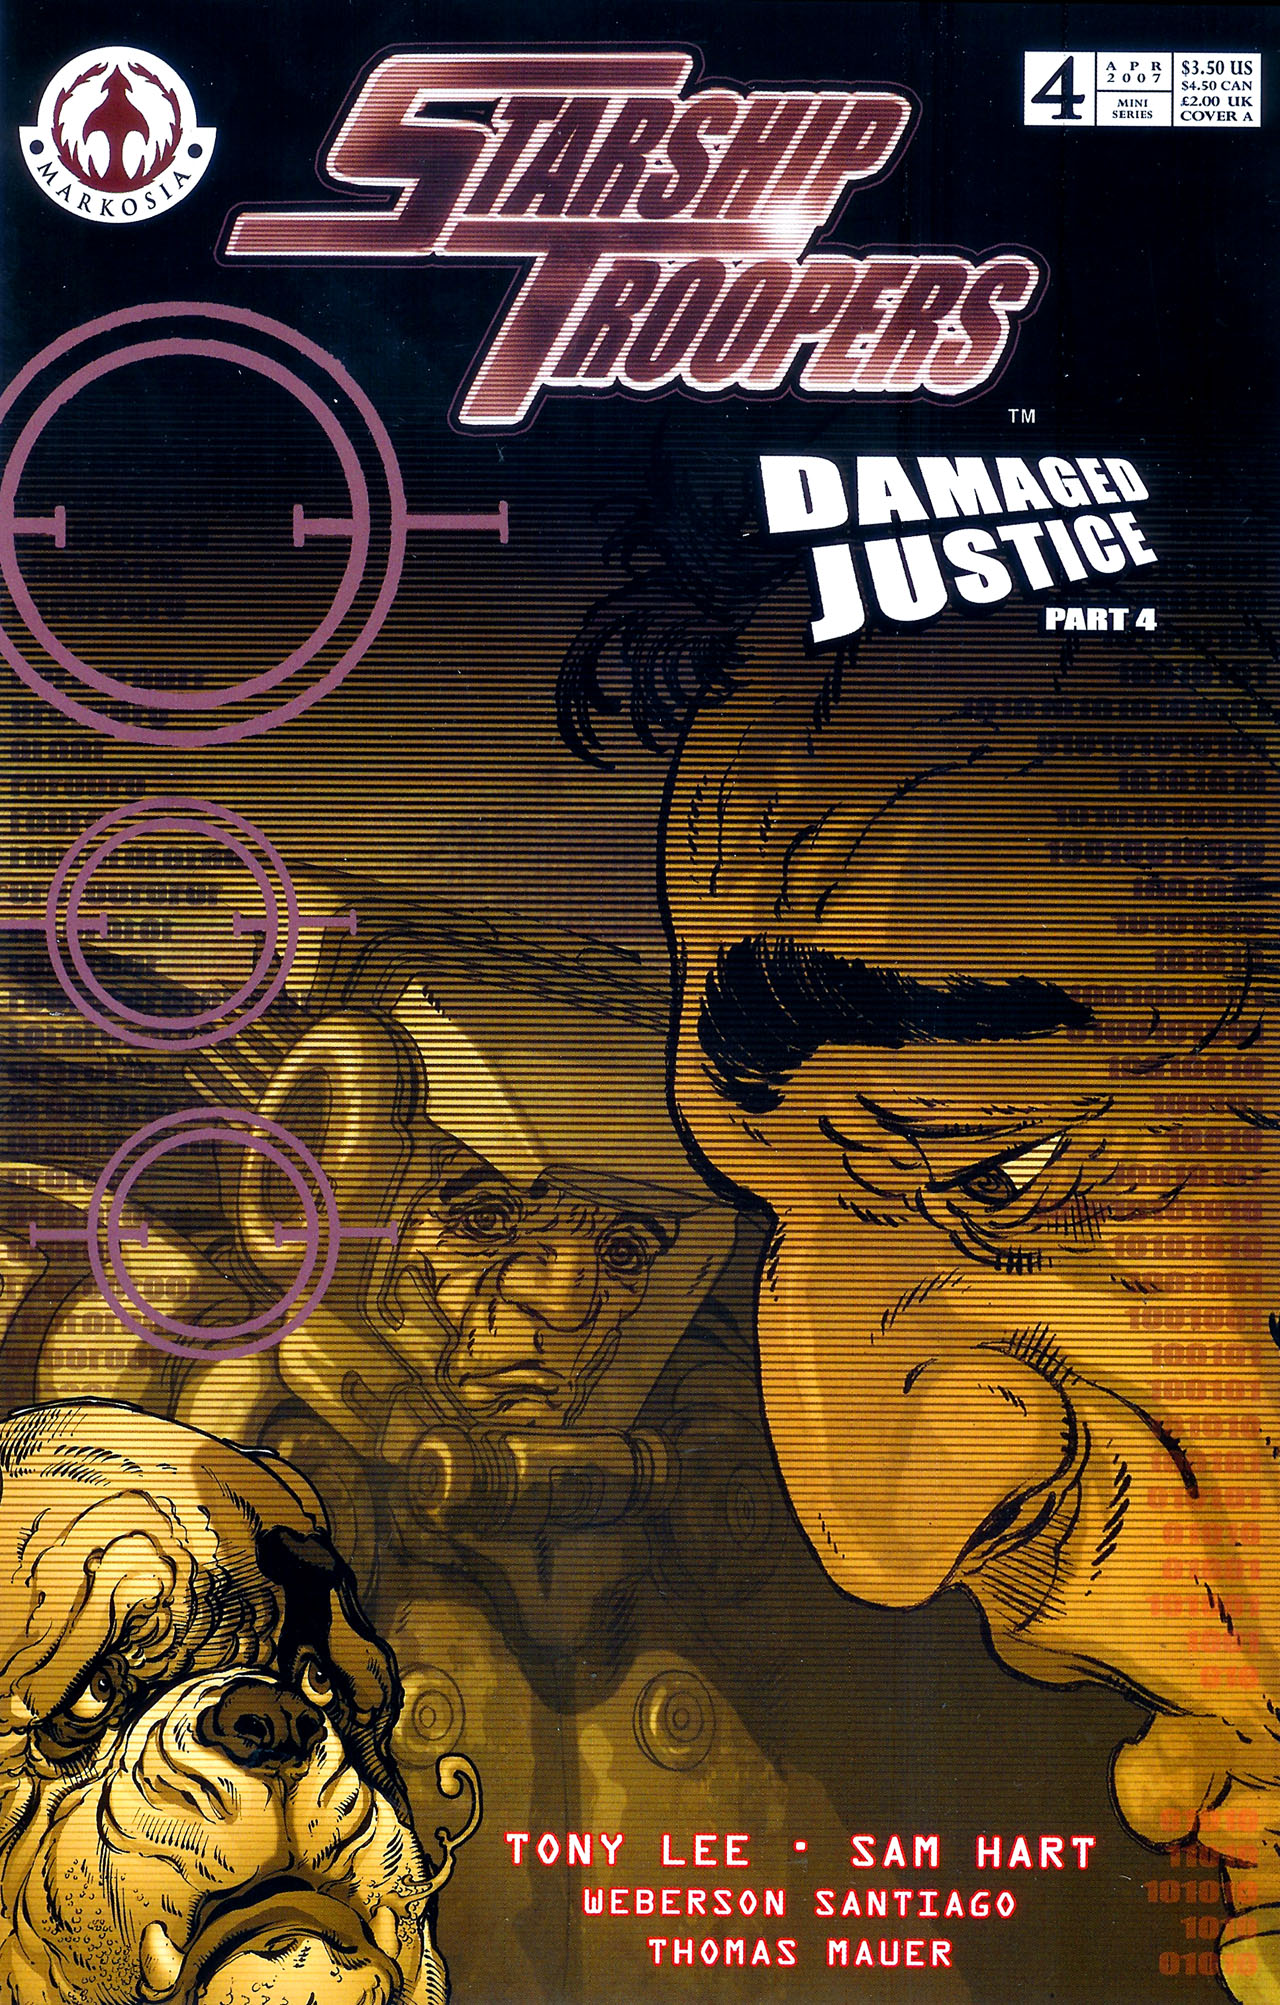 Read online Starship Troopers: Damaged Justice comic -  Issue #4 - 1